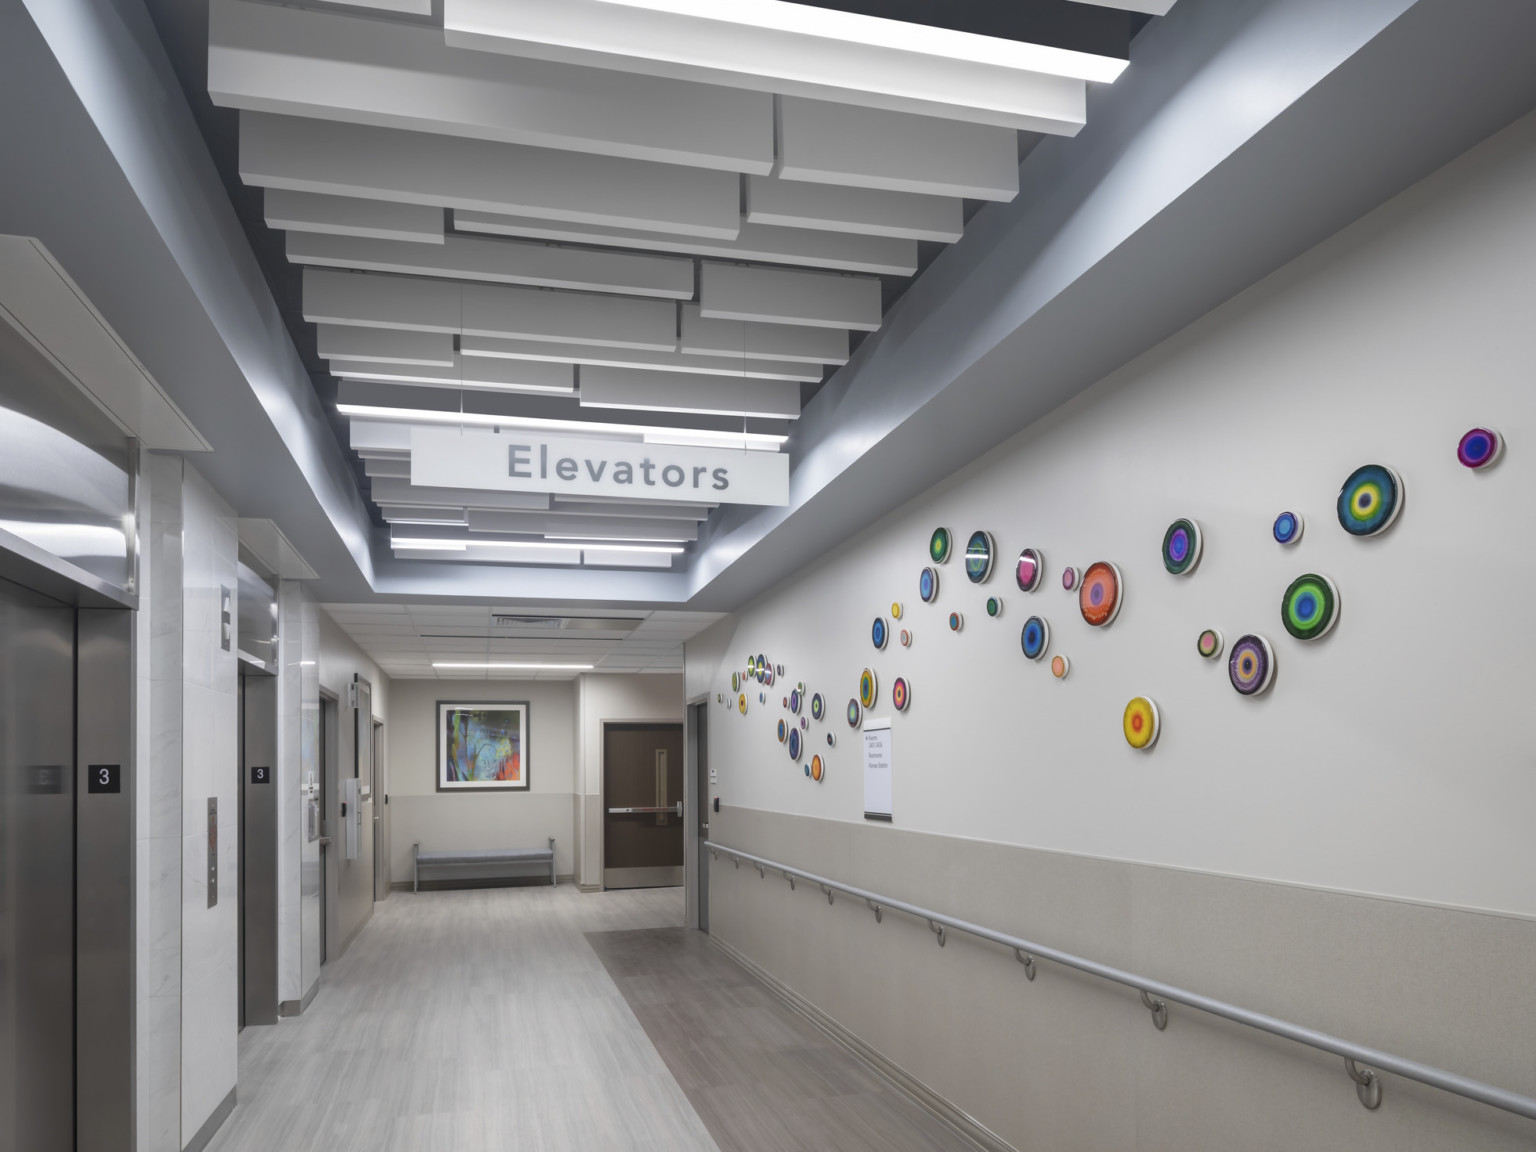 White and grey hallways with acoustical panels hanging above, abstract round art on wall opposite elevators